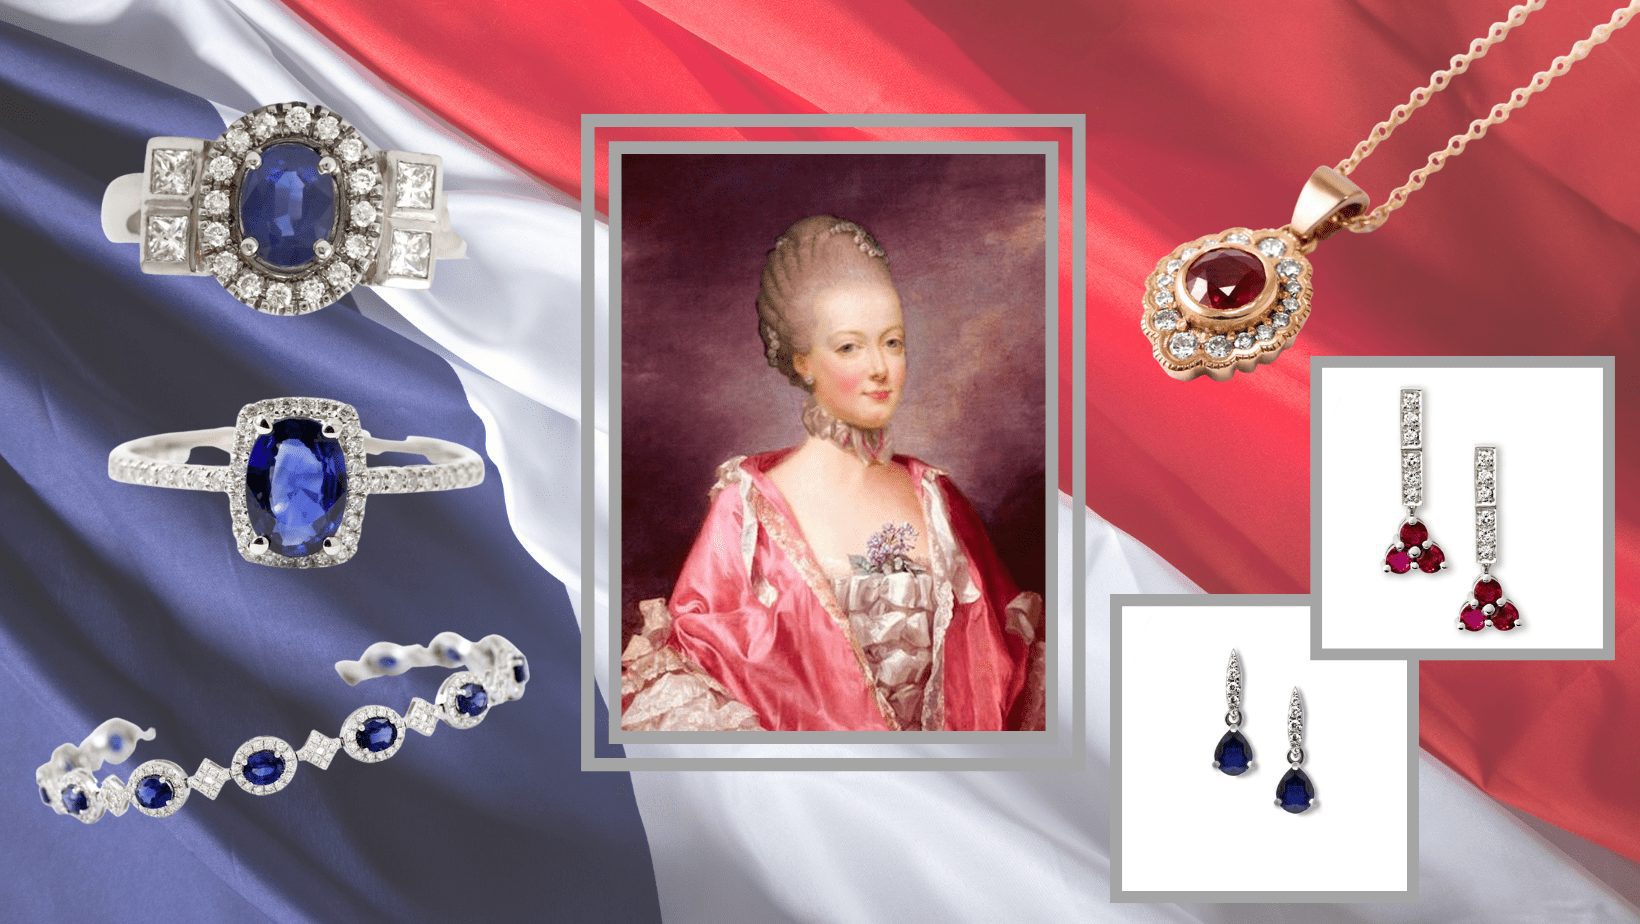 Our personal selection for Queen Marie Antoinette of France. These pieces were designed and crafted by Penchant Fine Jewellery. Ruby, sapphire and diamonds were used.